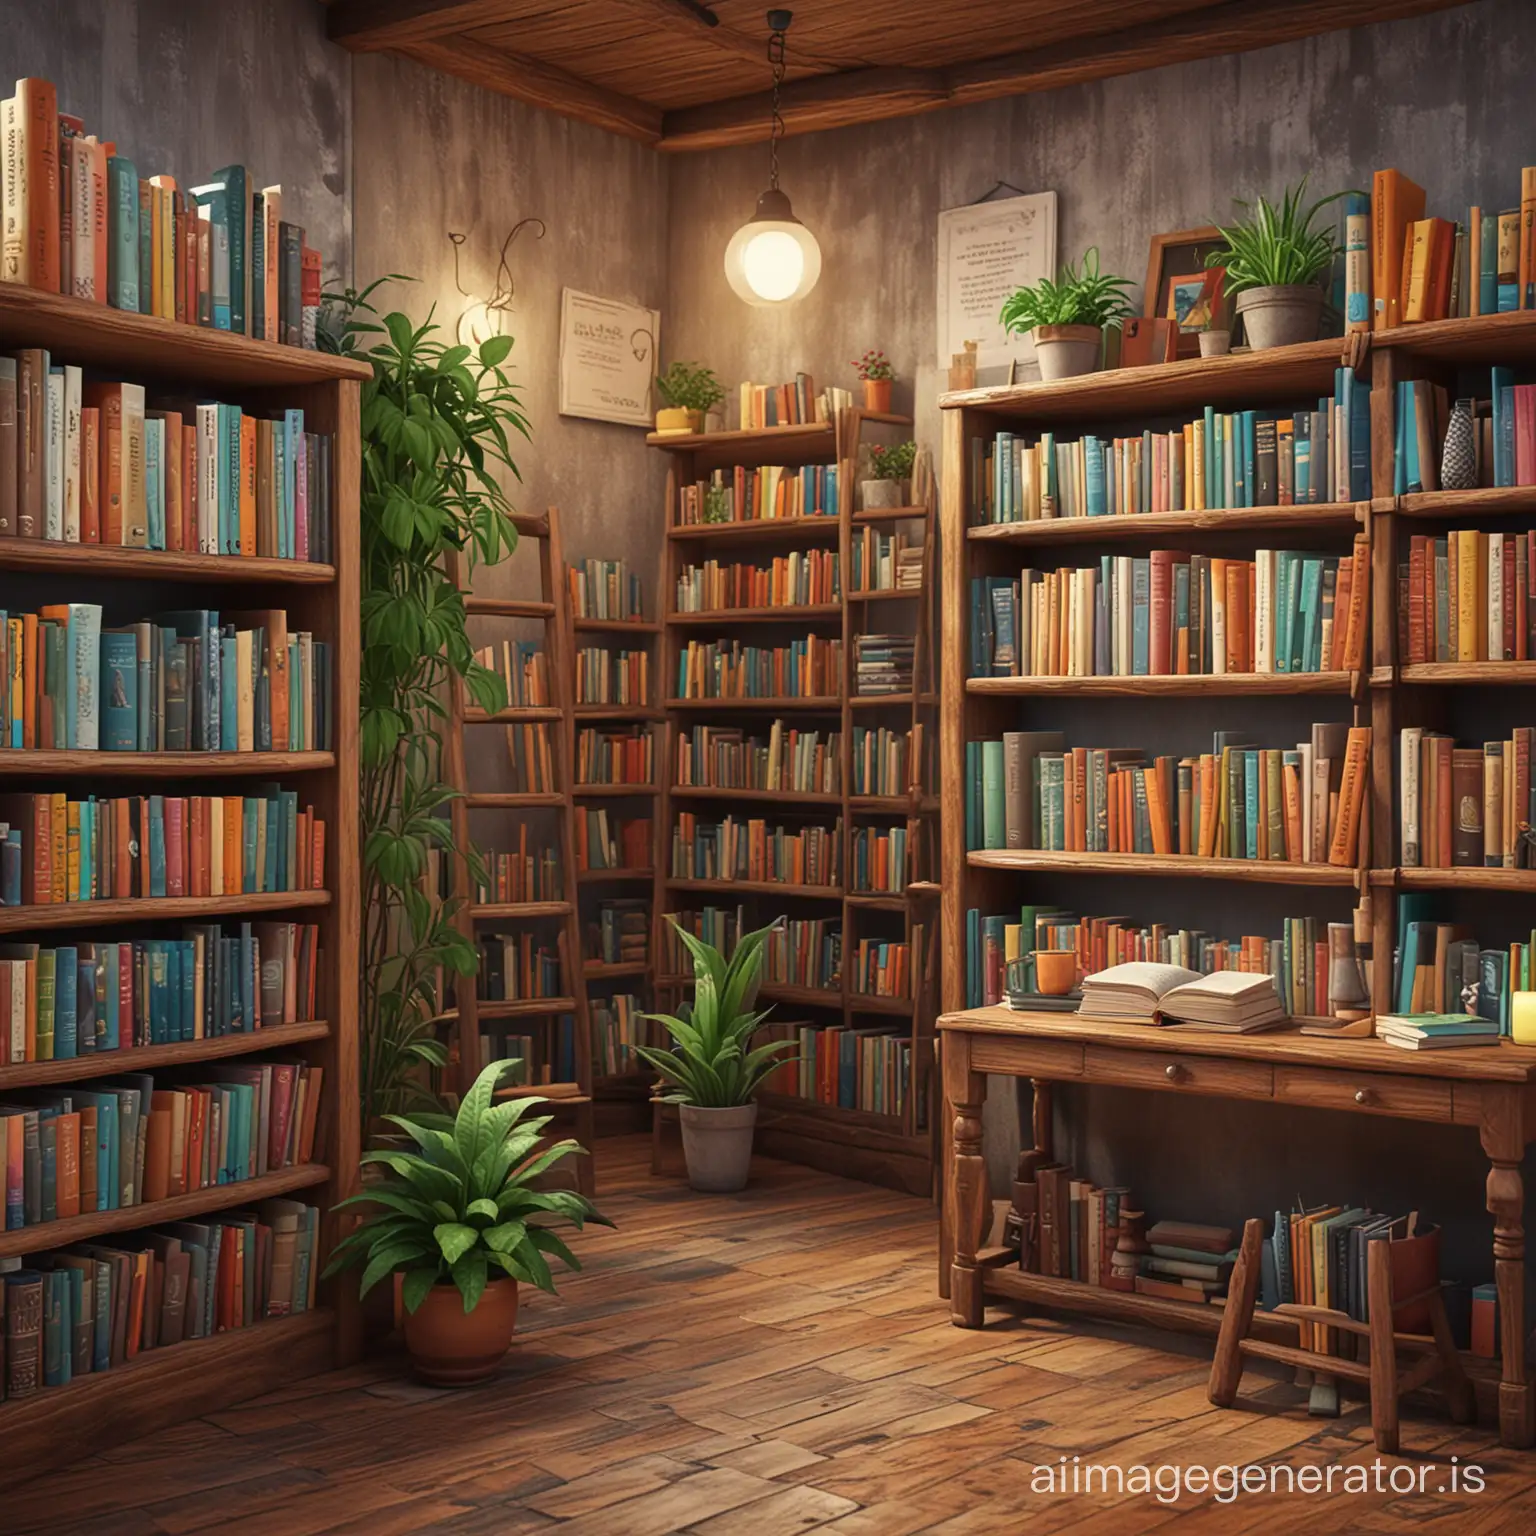 Cozy-Old-Bookshop-Interior-with-Colorful-Books-and-Plants